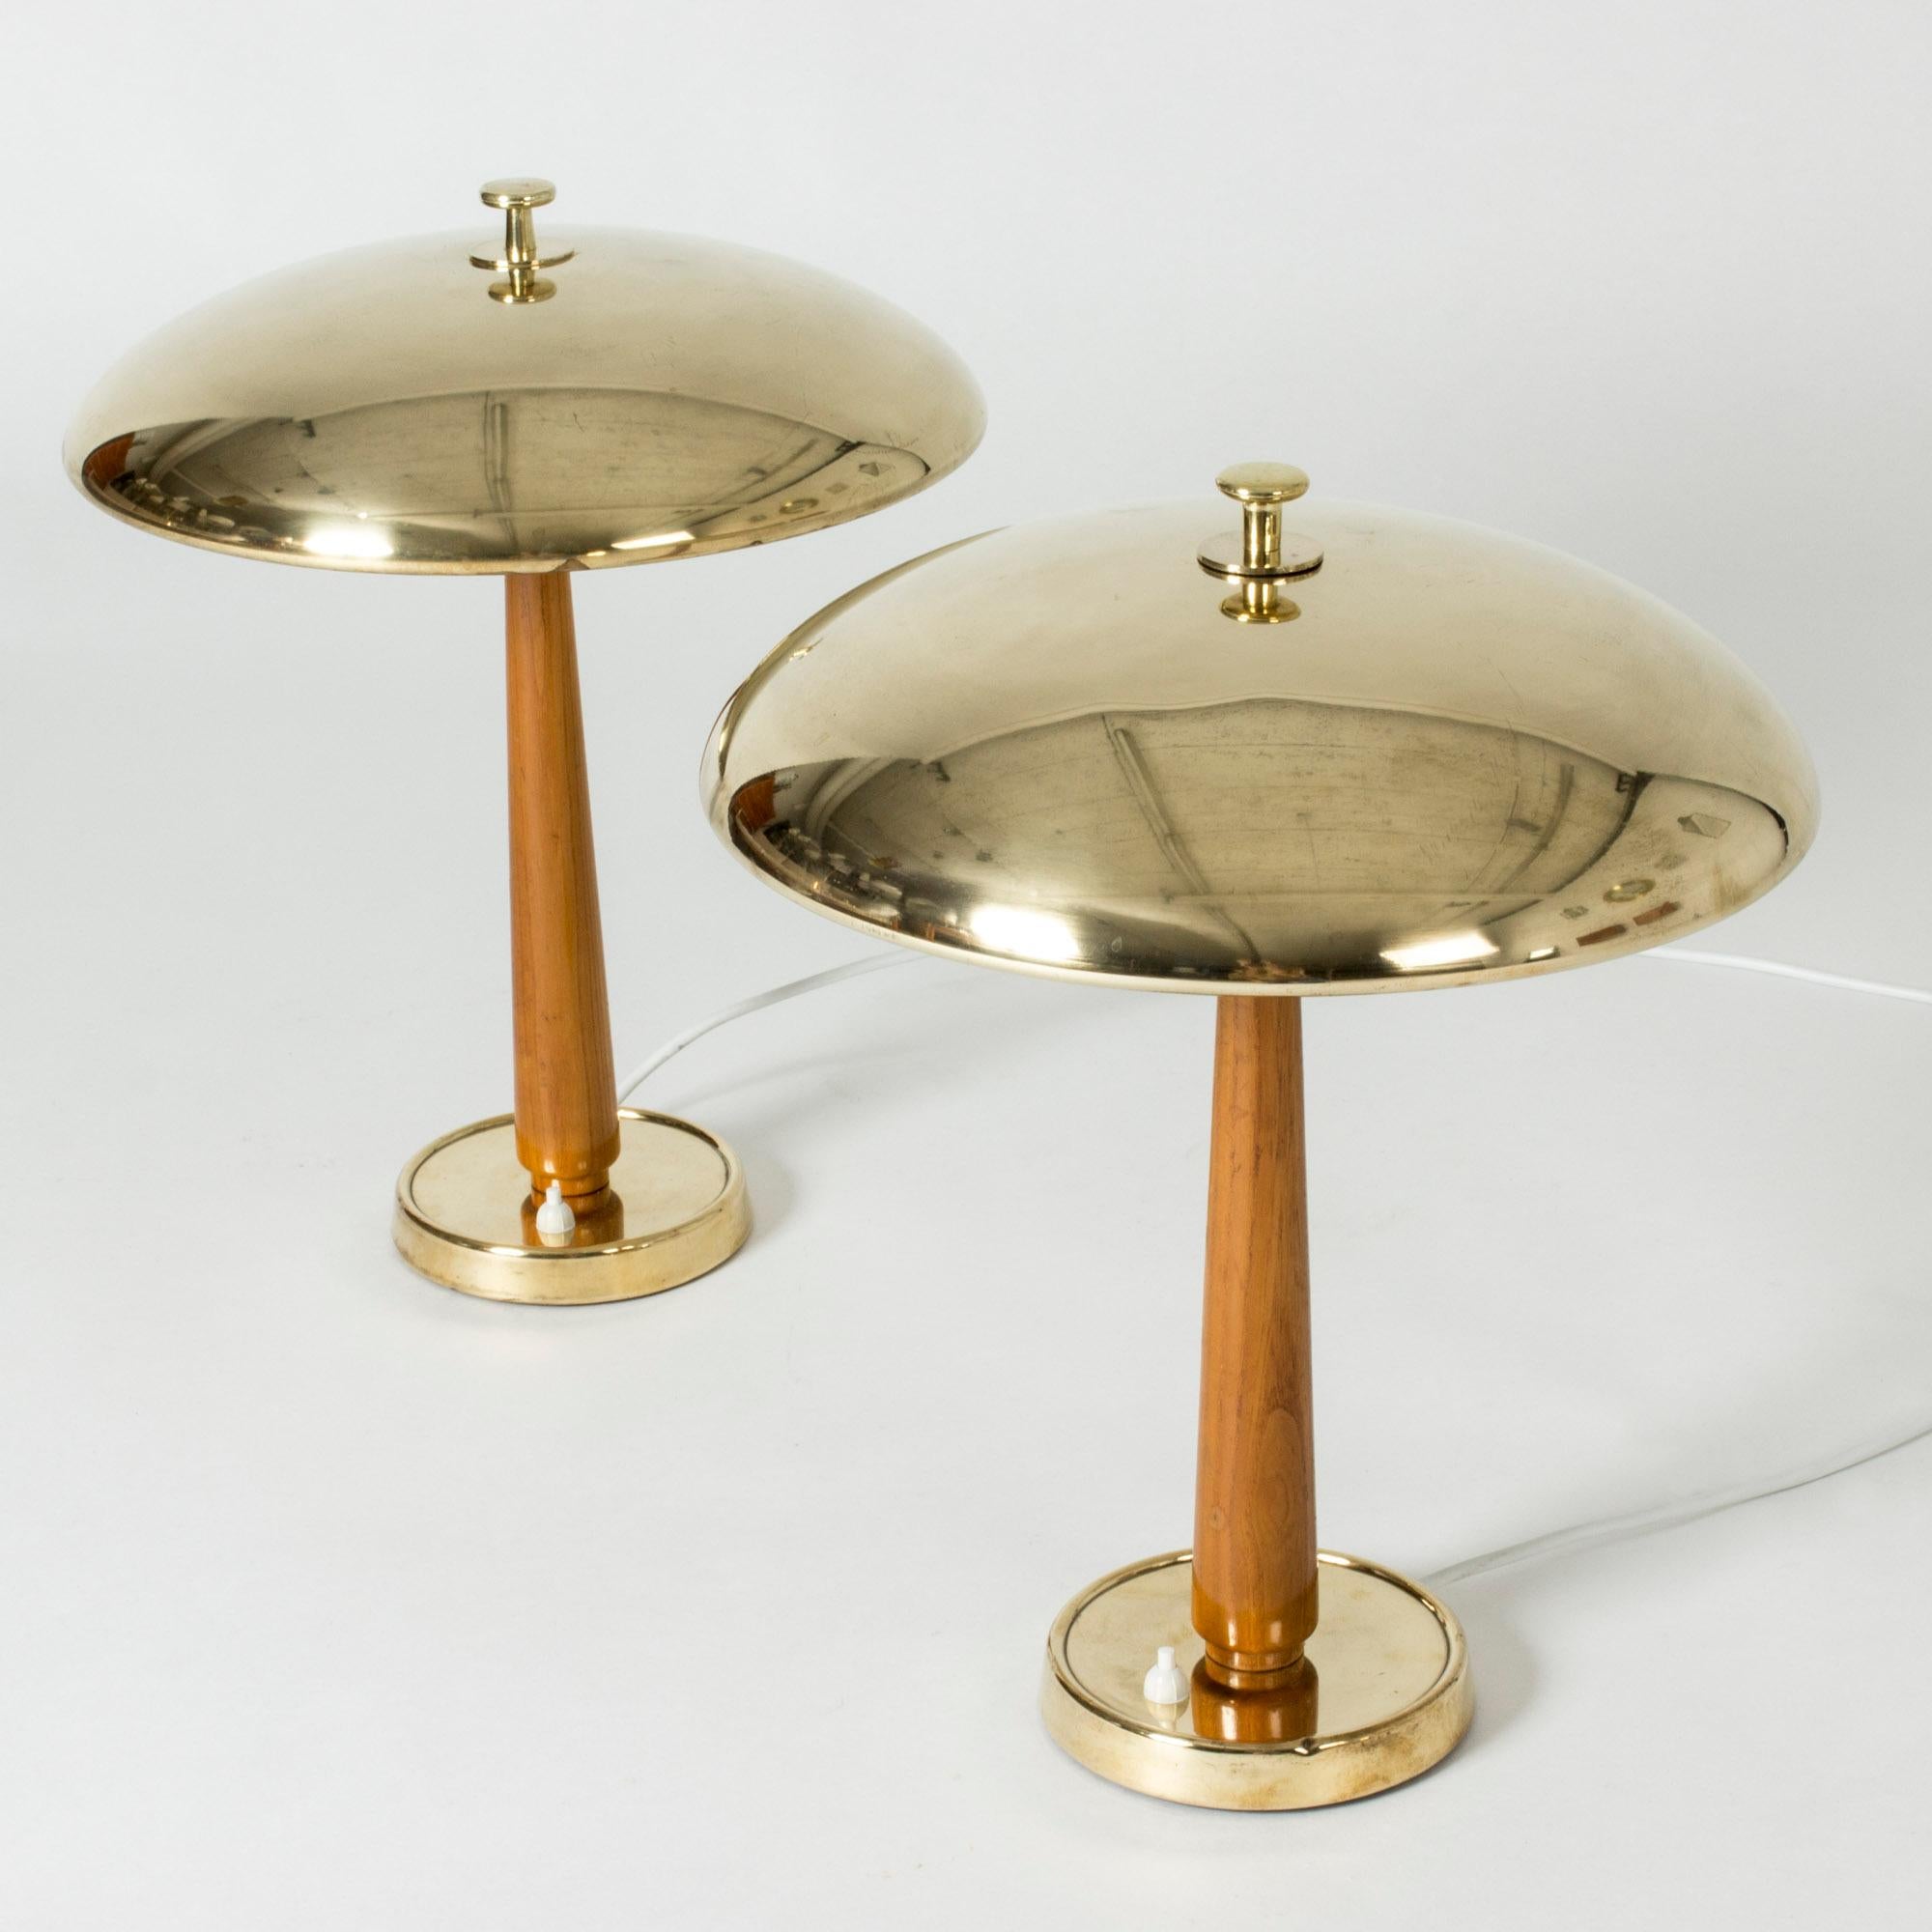 Pair of amazing table lamps from NK, with wide, streamlined brass shades. Cool decorative knobs on the tops. Smooth wooden handles and brass bases. Beautiful combination of materials. Price is for the pair.